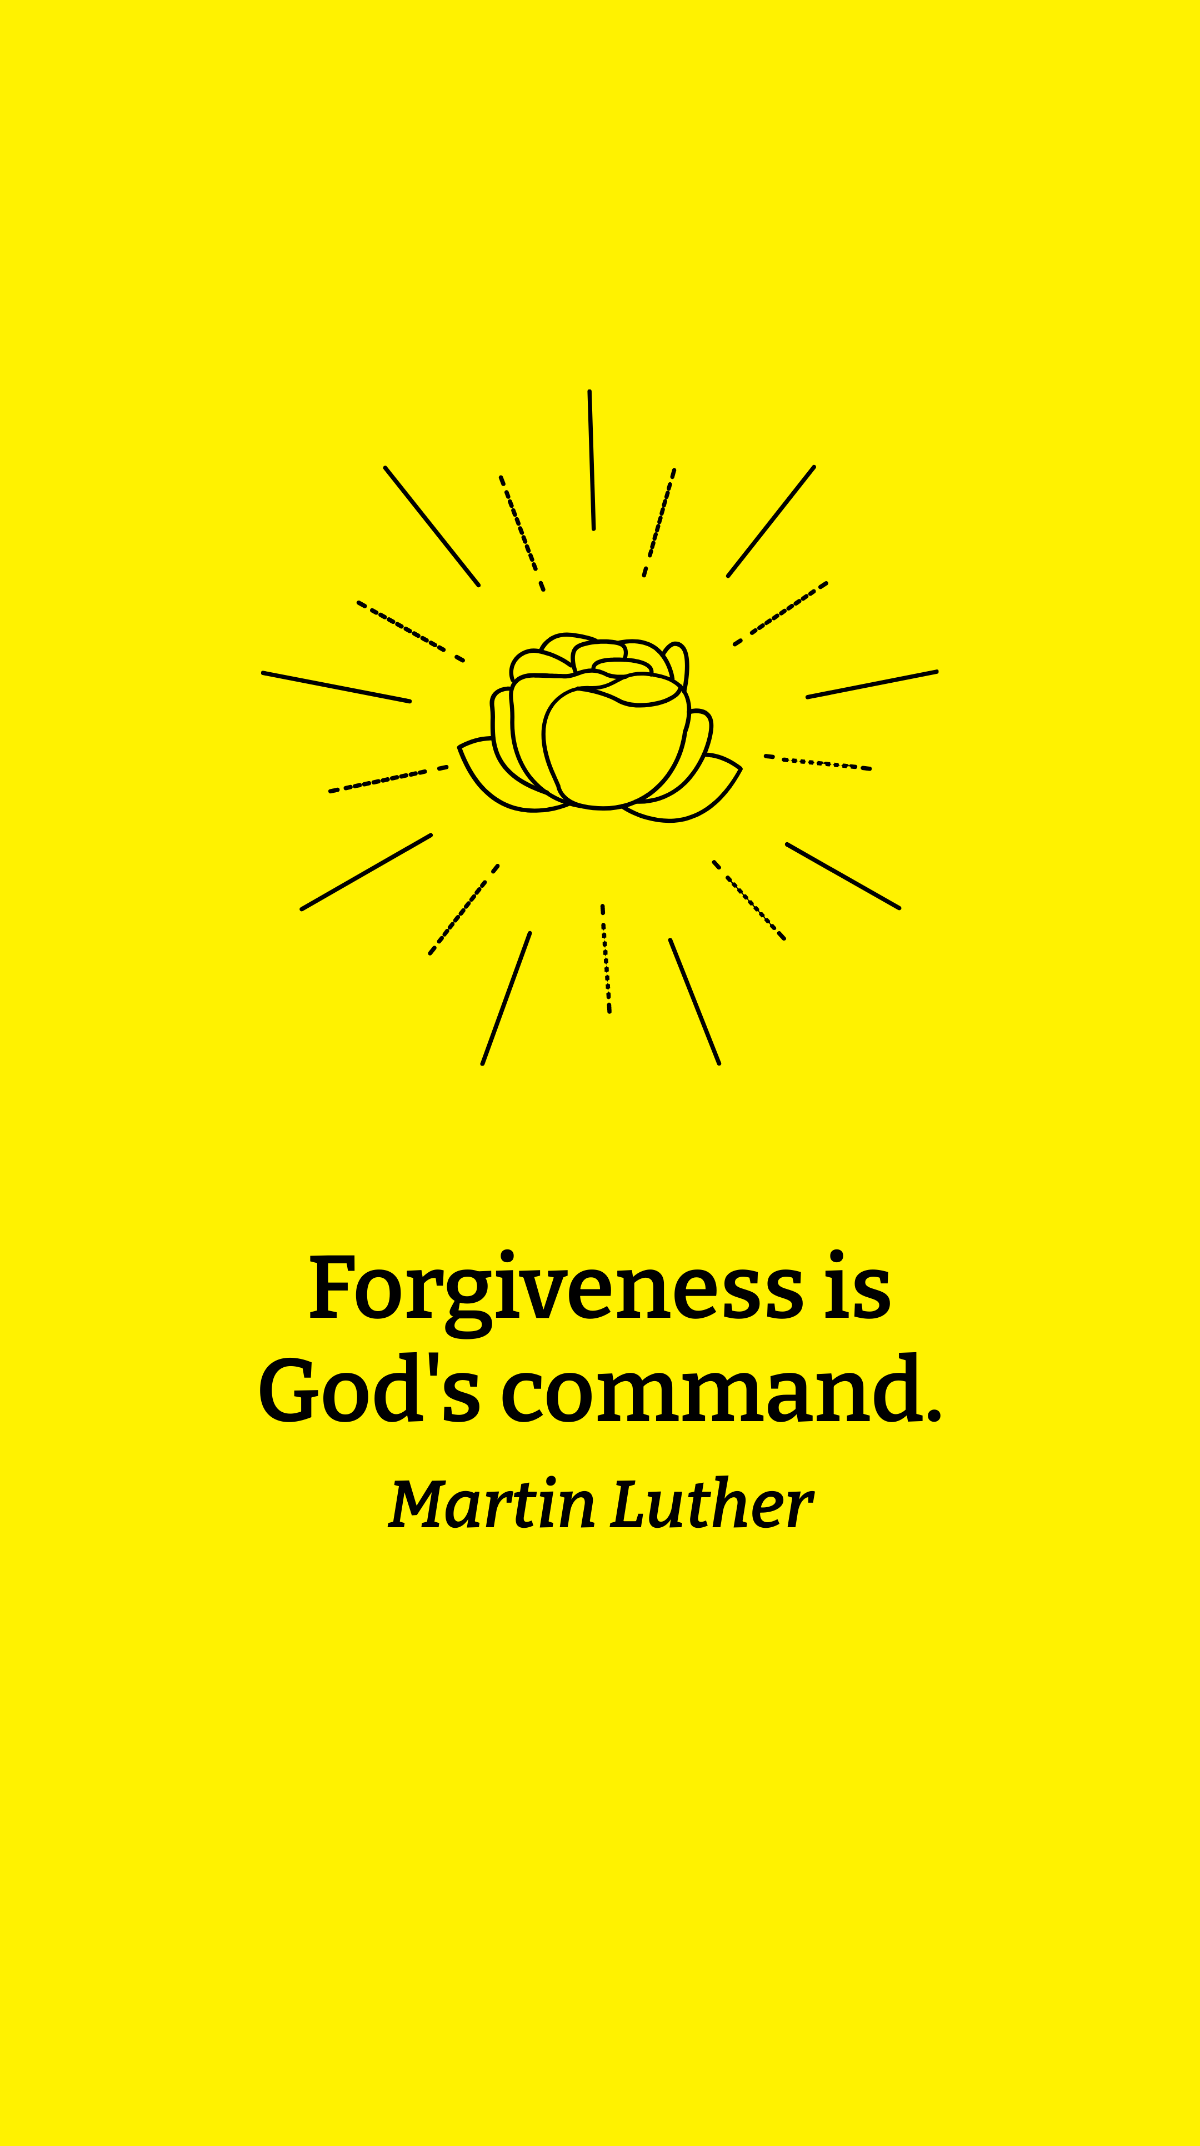 Martin Luther - Forgiveness is God's command. Template